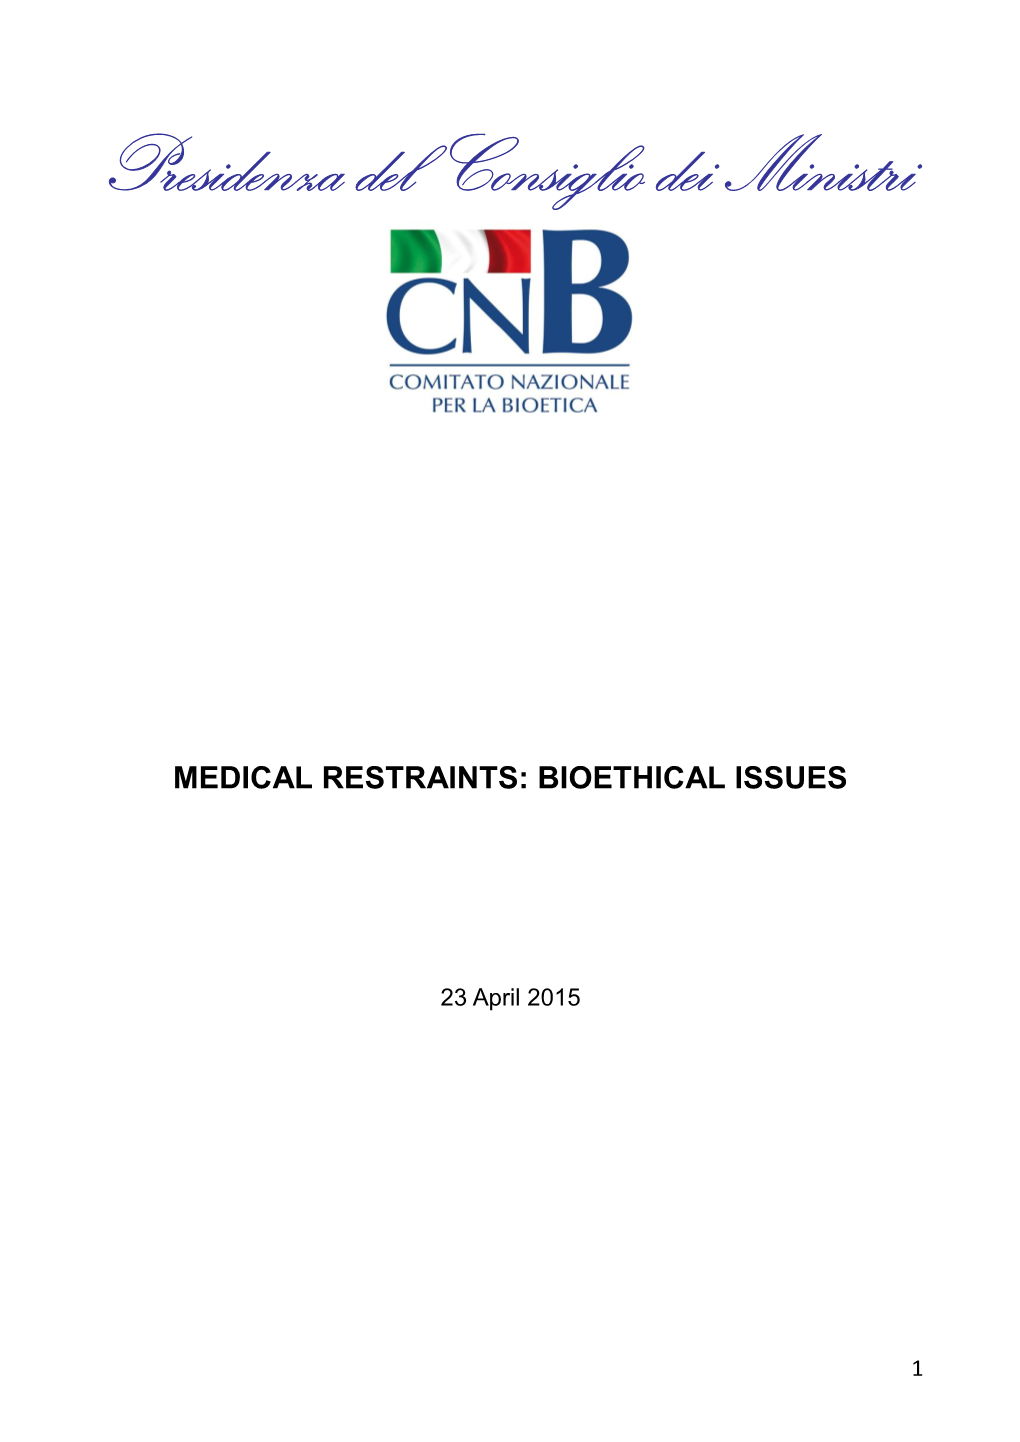 Medical Restraints: Bioethical Issues